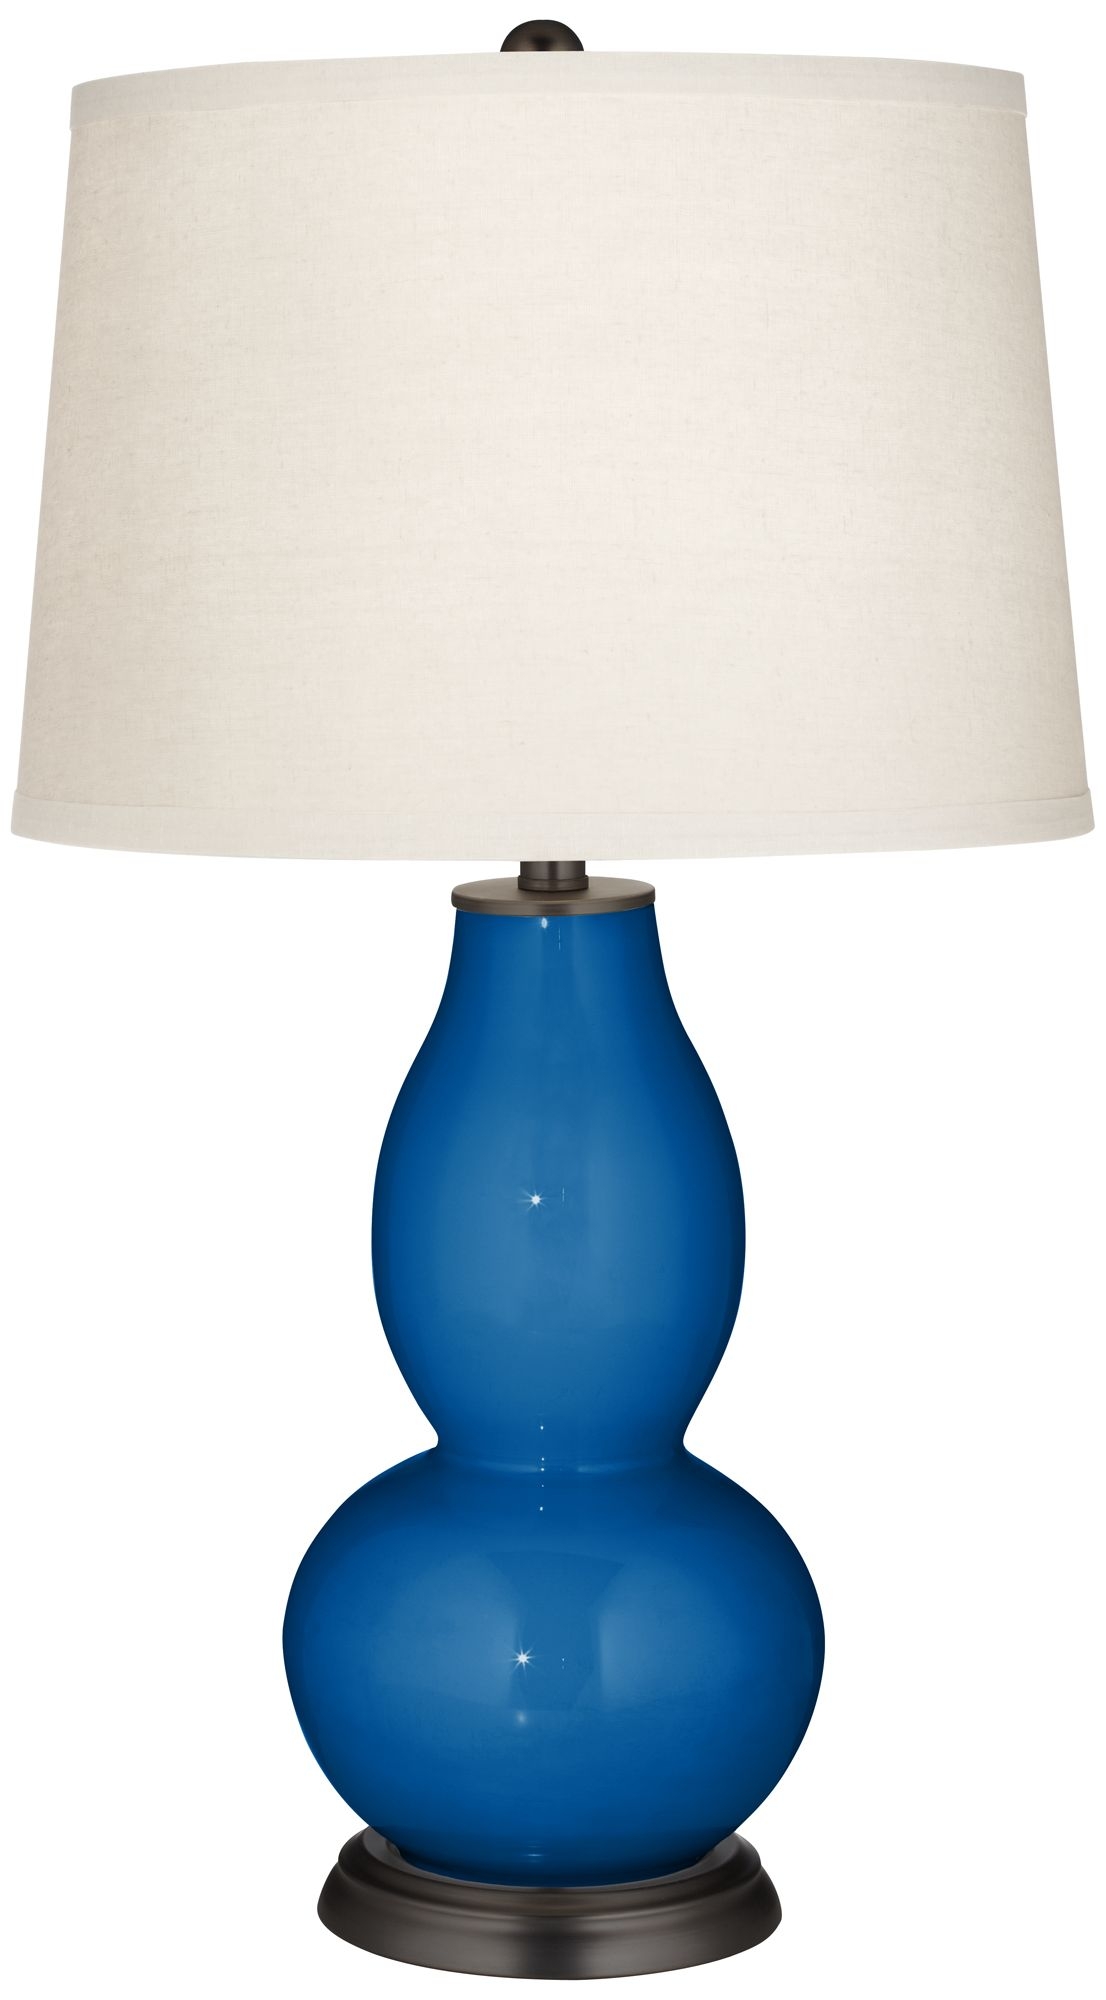 Hyper Blue Double Gourd Table Lamp - Image 0